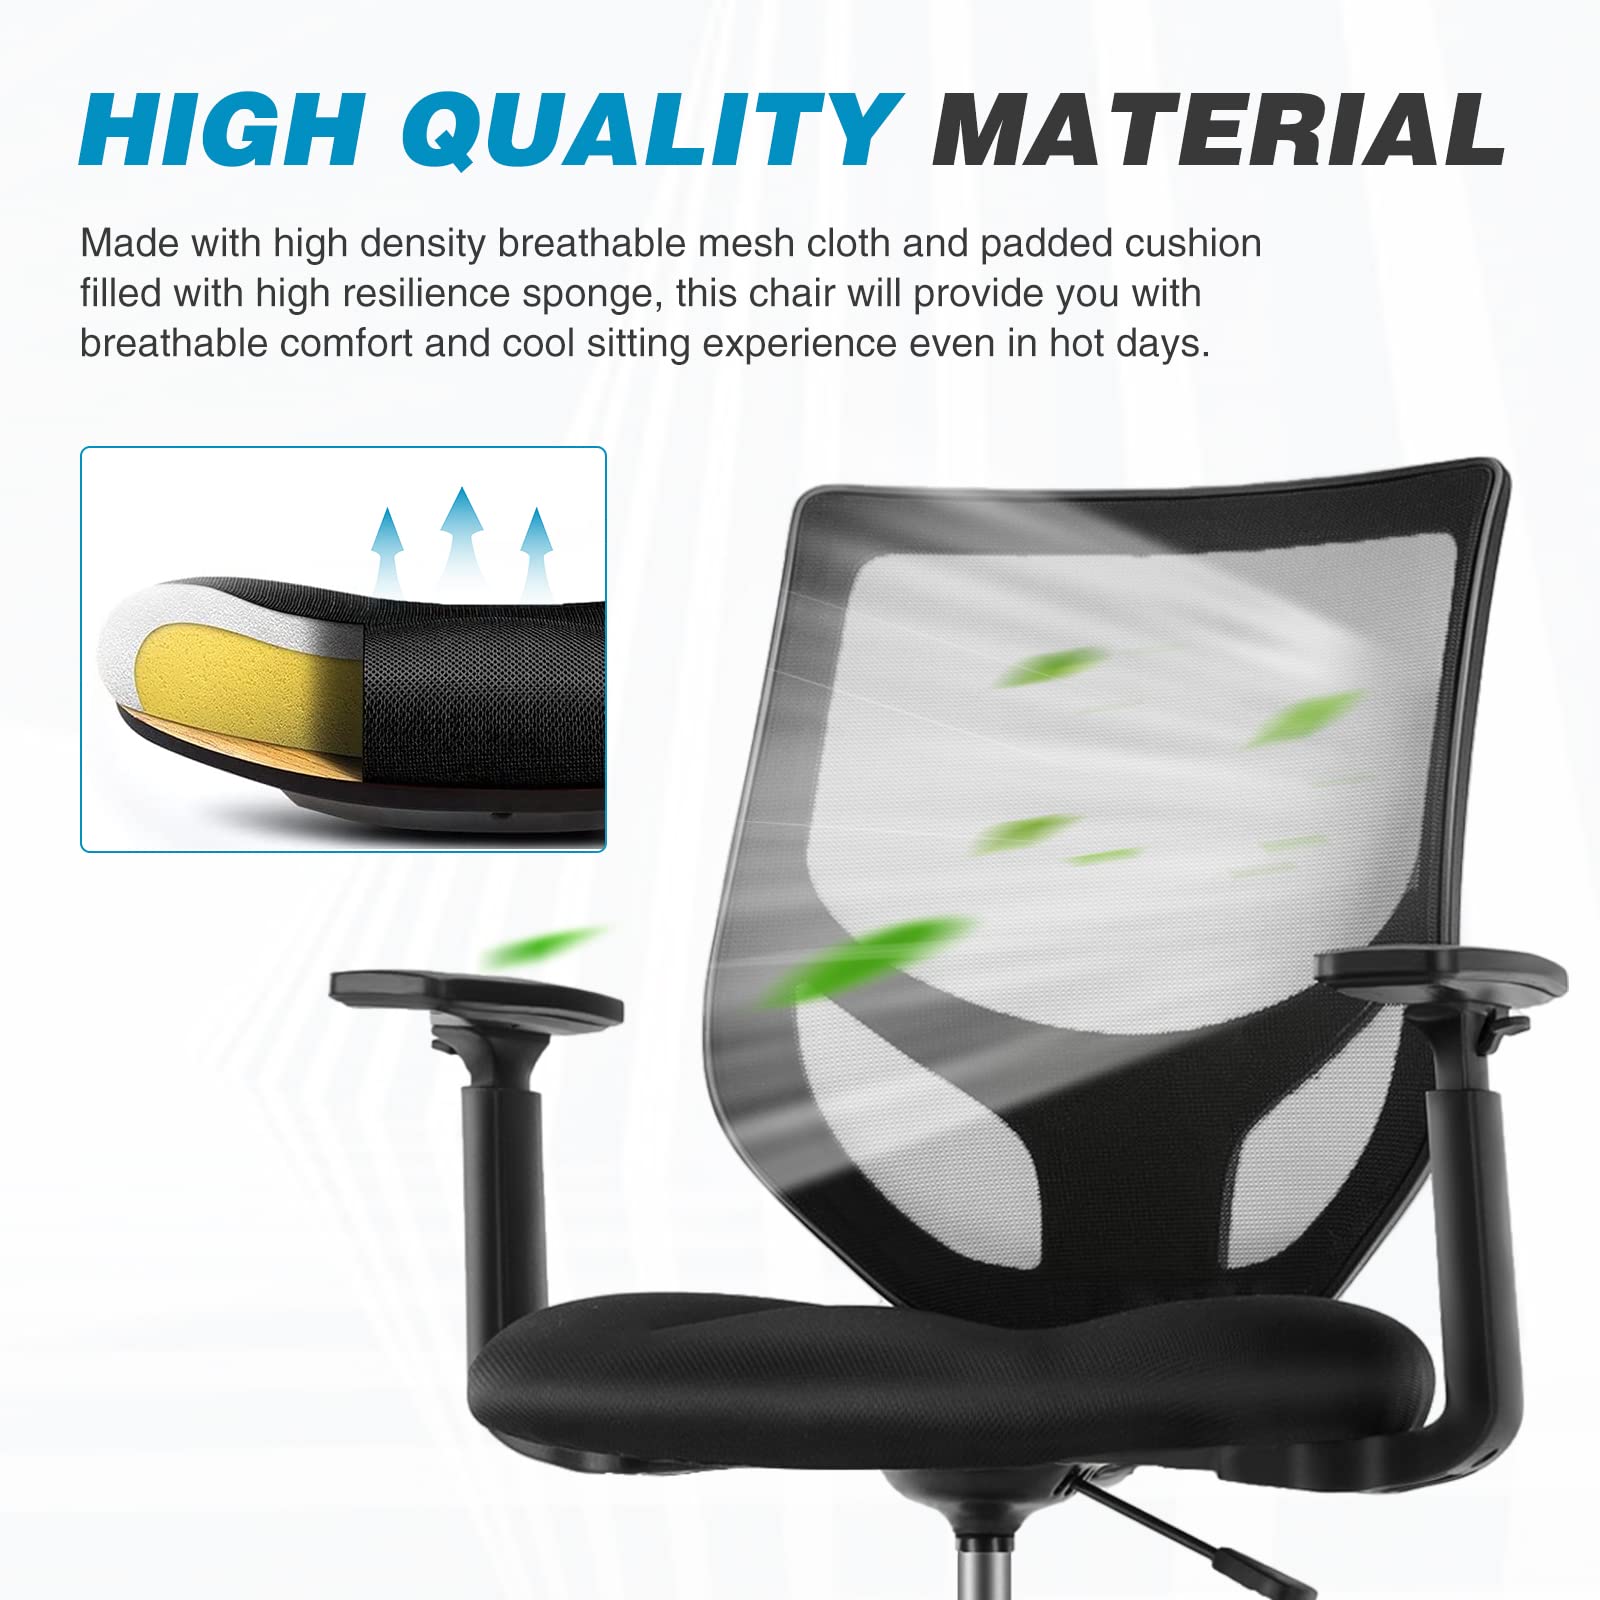 Drafting Chair, Standing Desk Chair with Adjustable Armrests and Foot Ring, Height Adjustable Tall Office Chair with Ergonomic Lumbar Support, 360 Degree Swivel Rolling Chair, Breathable Mesh Chair